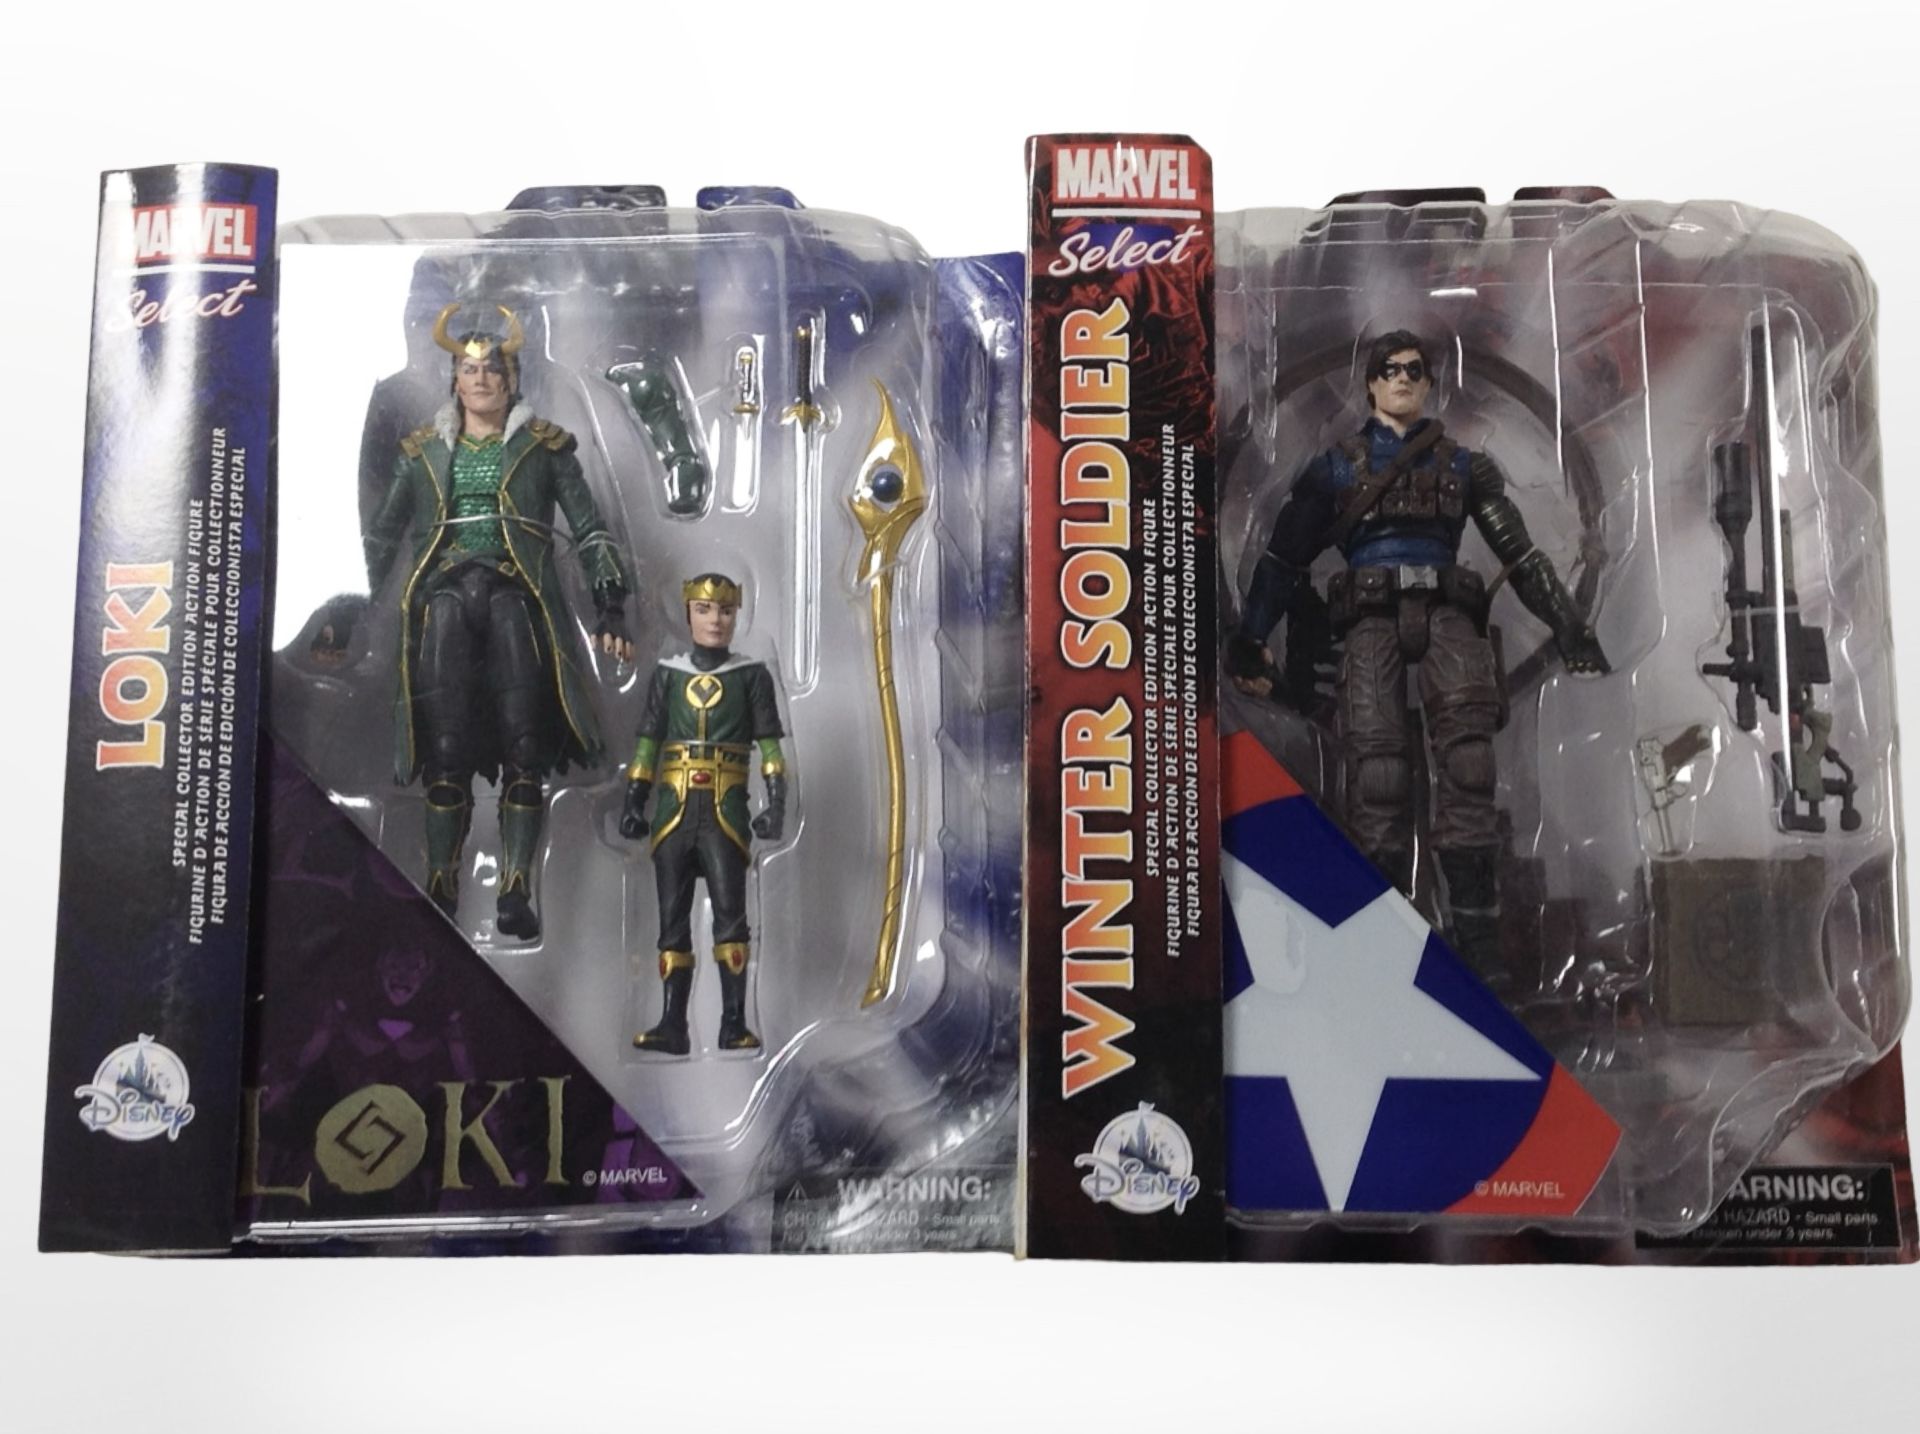 Two Marvel Select figurines, Loki and the Winter Soldier, boxed.